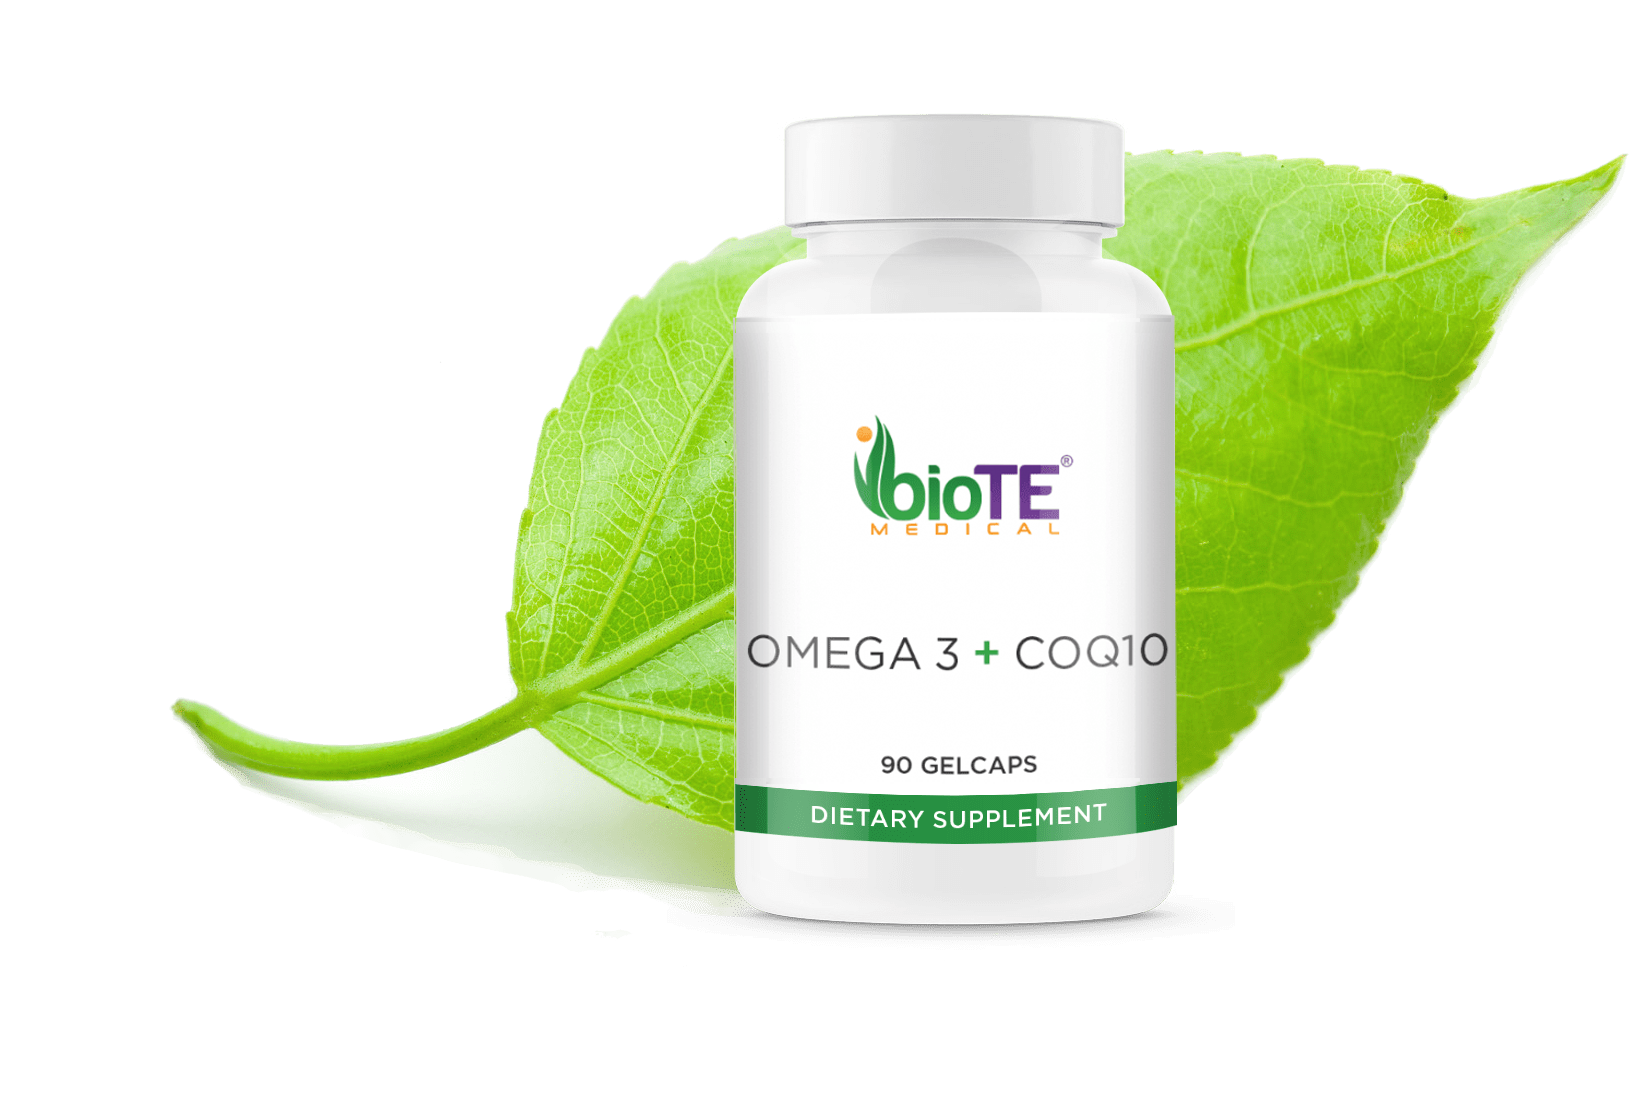 06_Nutraceuticals_DT_Products_Omega